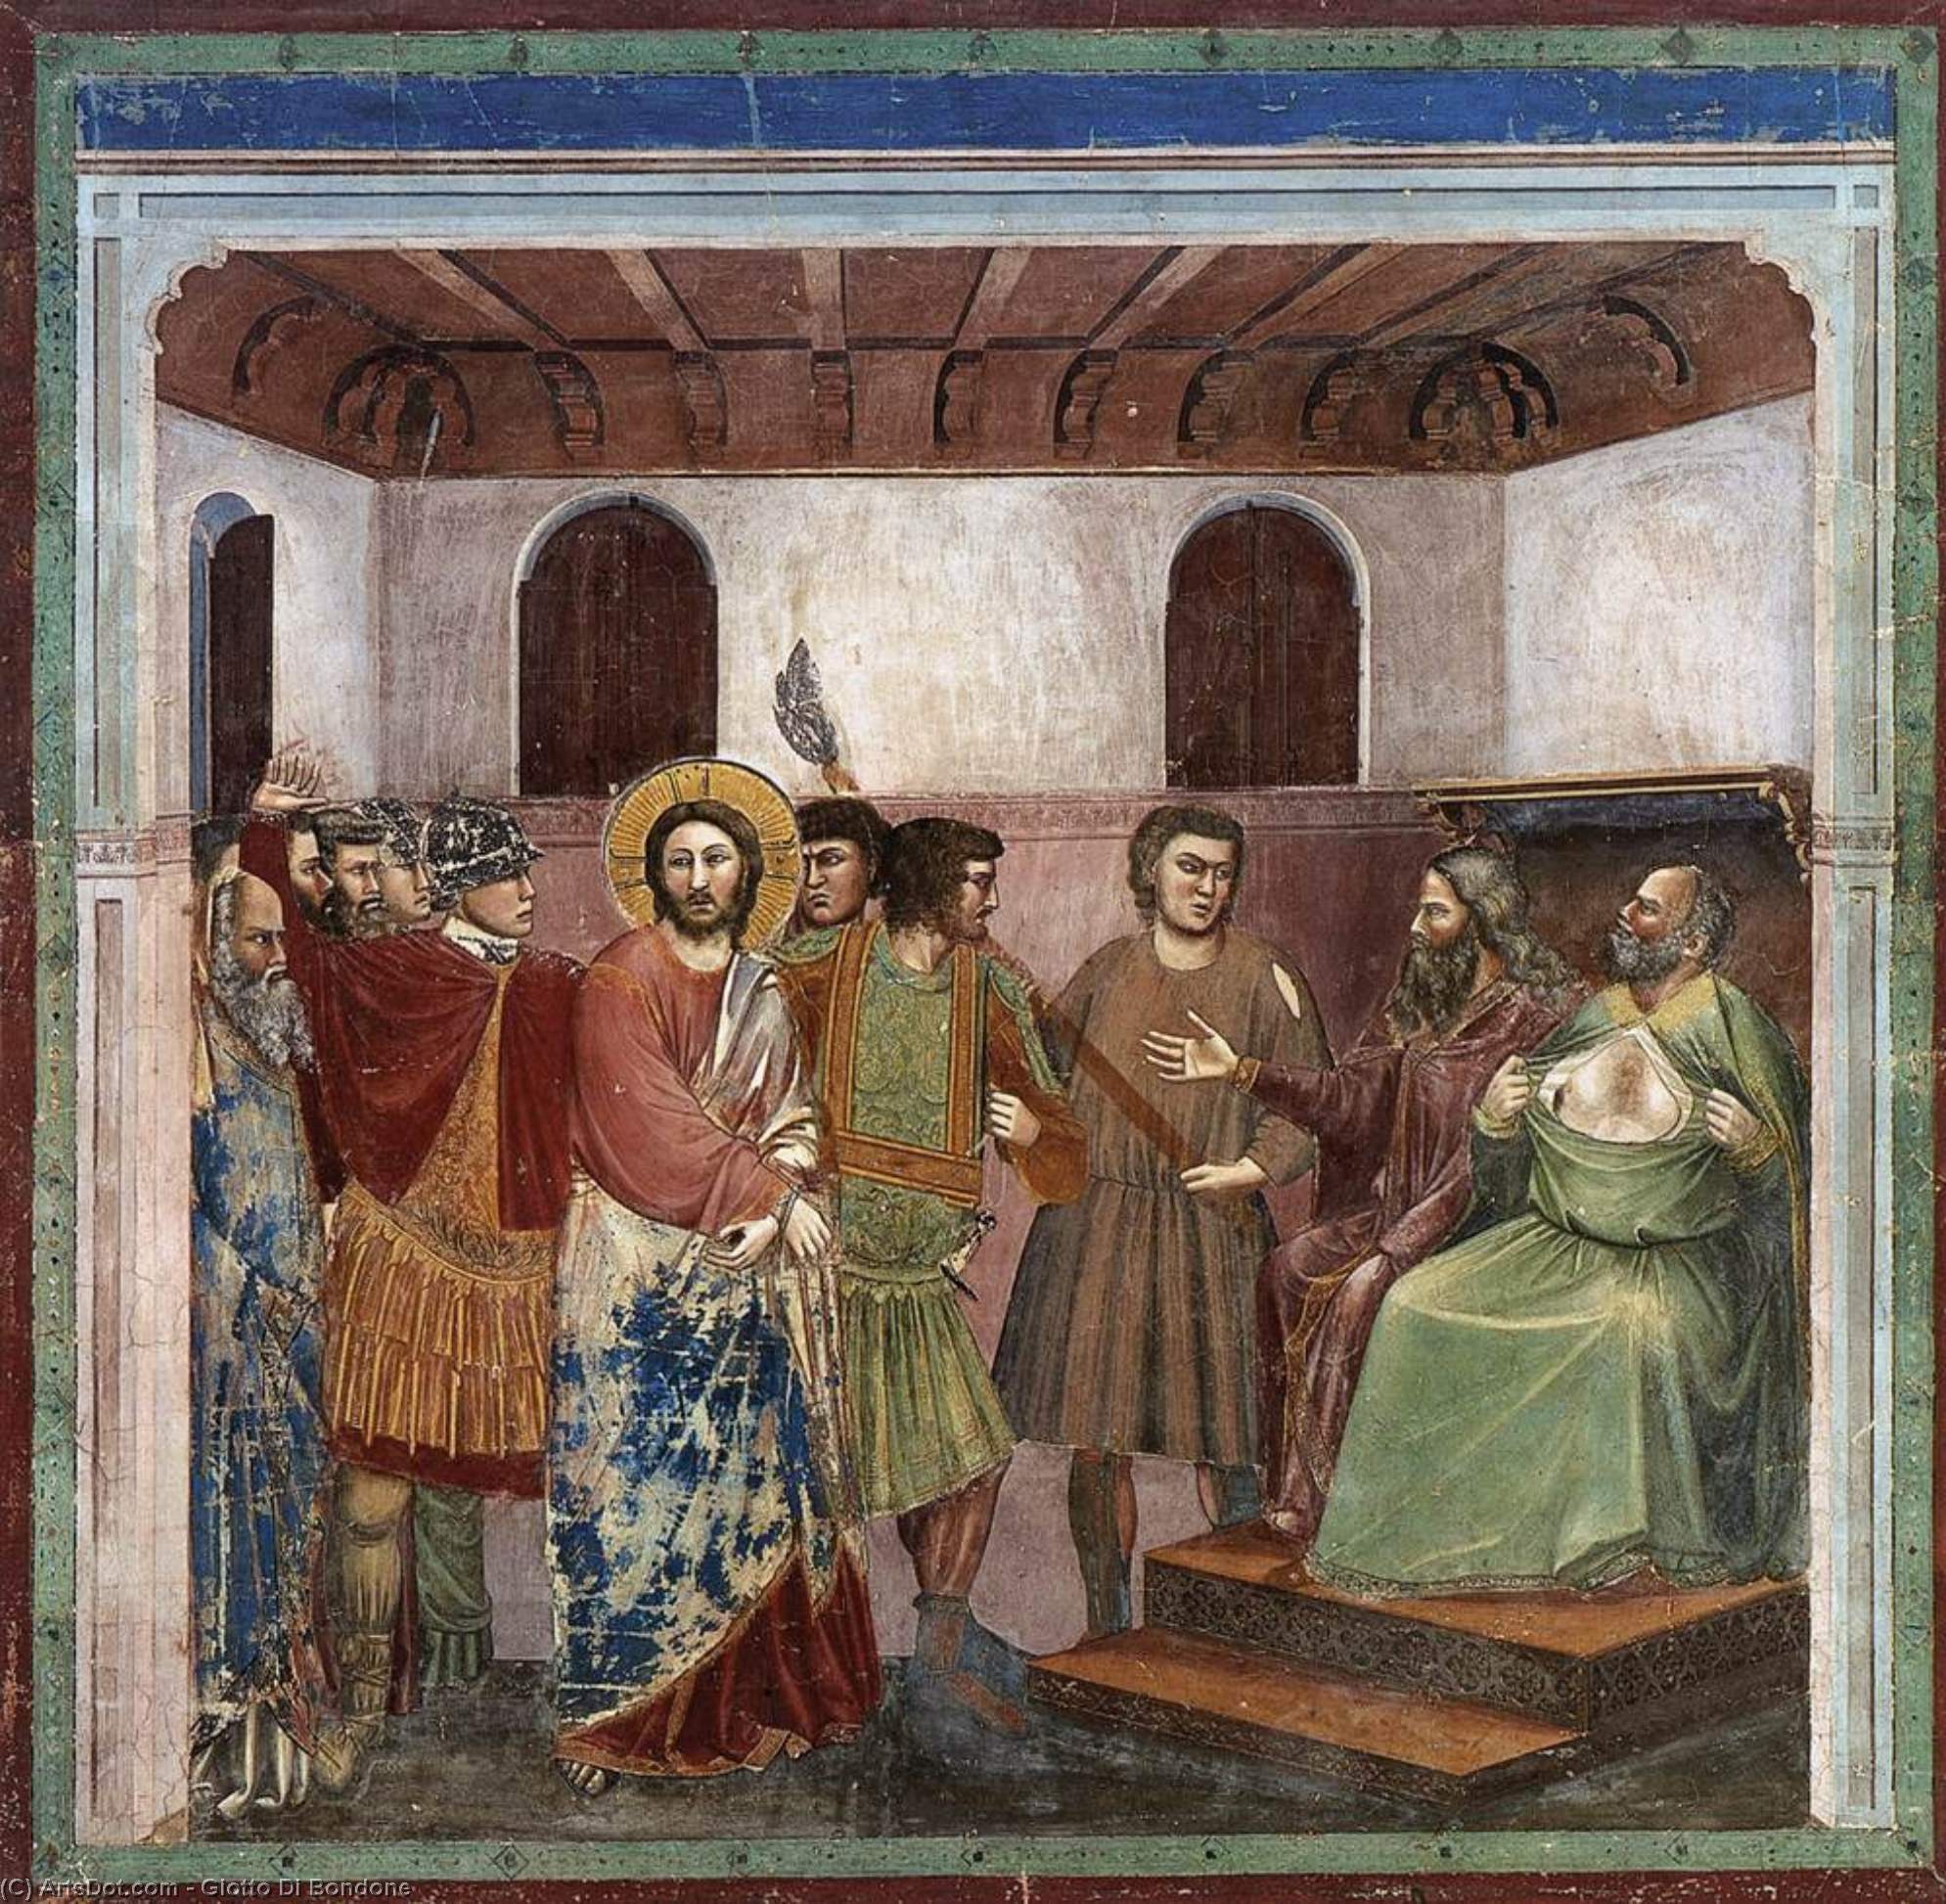 Buy Museum Art Reproductions No. 32 Scenes from the Life of Christ: 16. Christ before Caiaphas, 1304 by Giotto Di Bondone (1267-1337, Italy) | ArtsDot.com